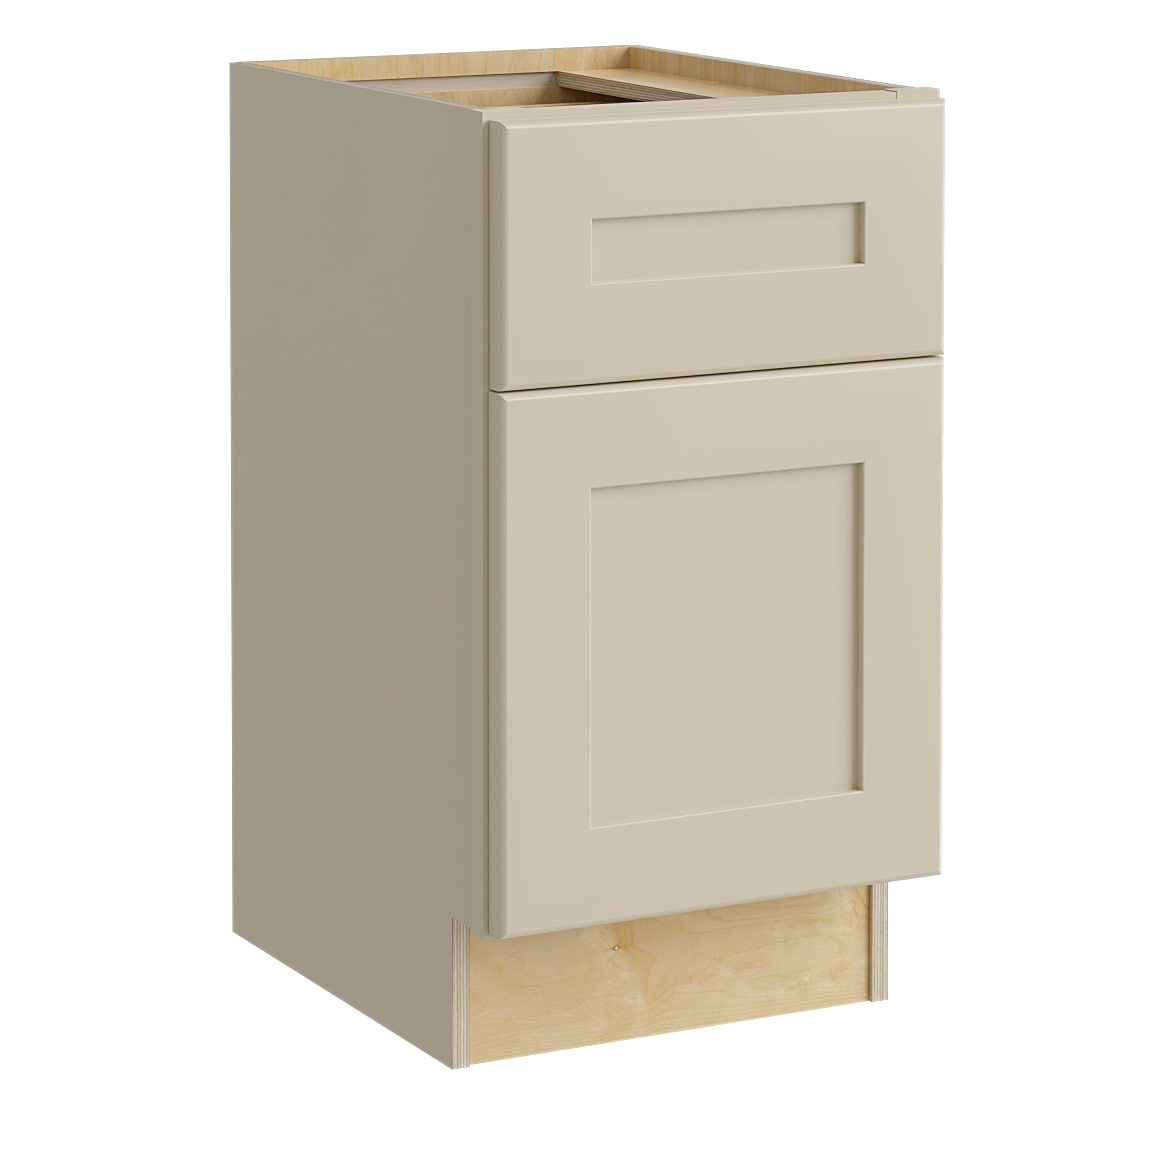 Luxxe Cabinetry 18-in W x 28.5-in H x 21-in D Norfolk Blended Cream Painted Drawer Base Fully Assembled Semi-custom Cabinet in Off-White | DDR18-NBC